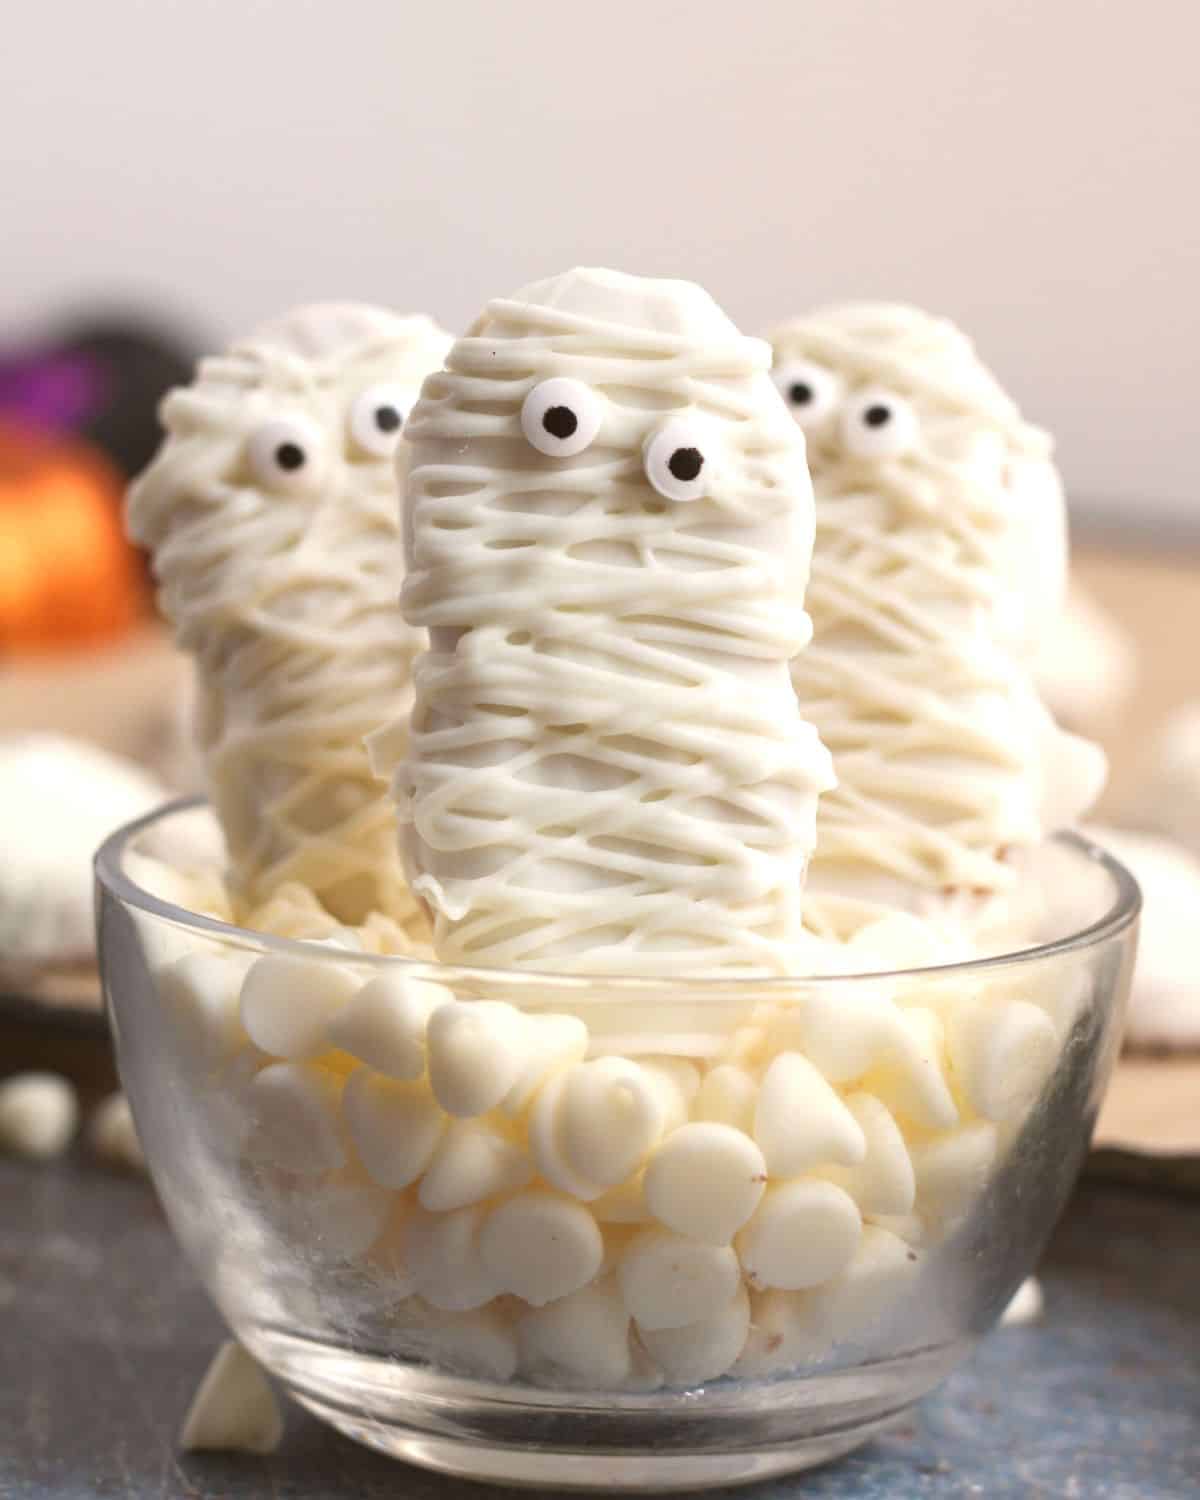 Mummy cookies on a bed of marshmallows in a glass cup.